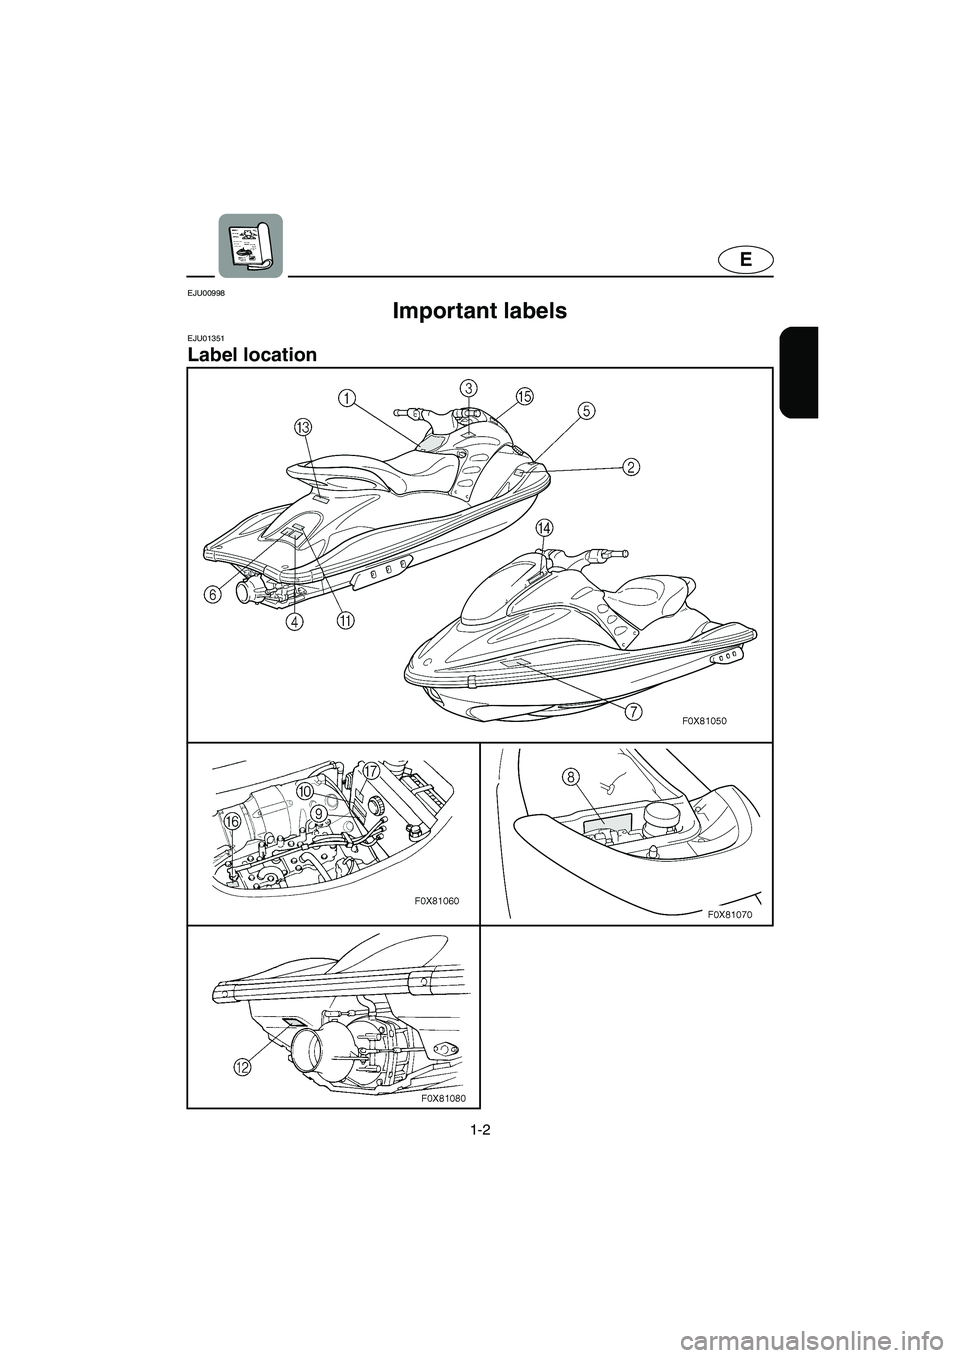 YAMAHA GP1200 2003  Owners Manual 1-2
E
EJU00998 
Important labels 
EJU01351 
Label location 
UF0X73.book  Page 2  Thursday, July 11, 2002  3:56 PM 